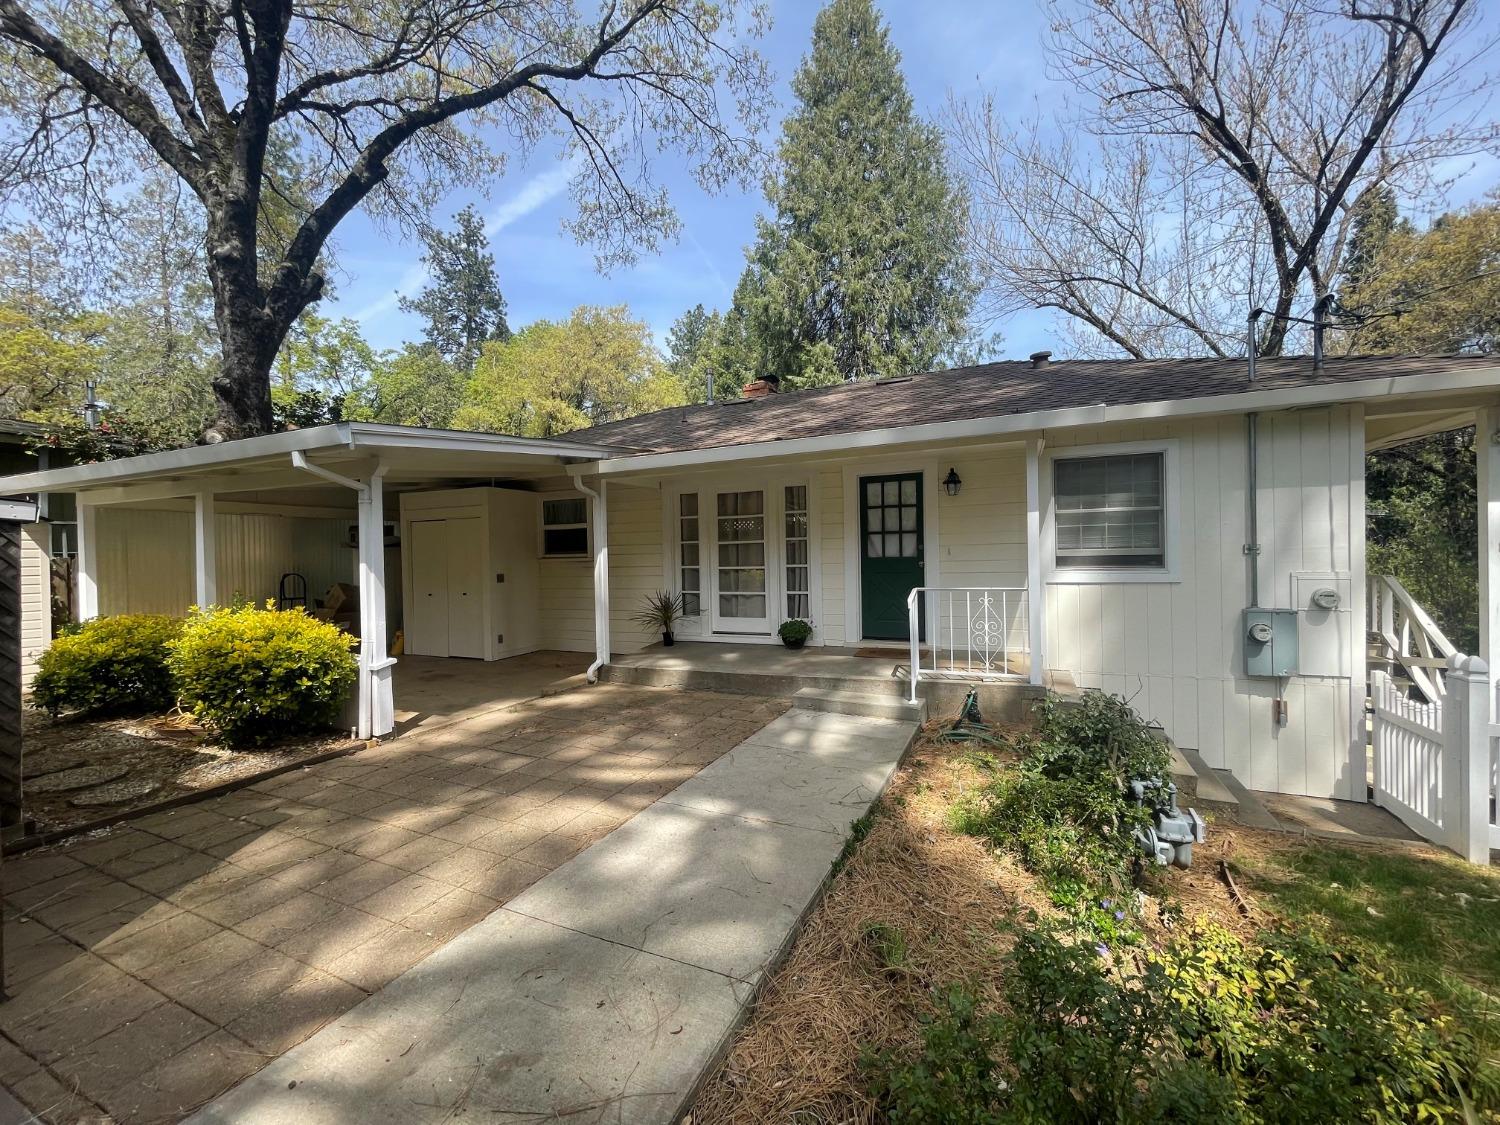 Photo of 11096 Stanley Wy in Grass Valley, CA